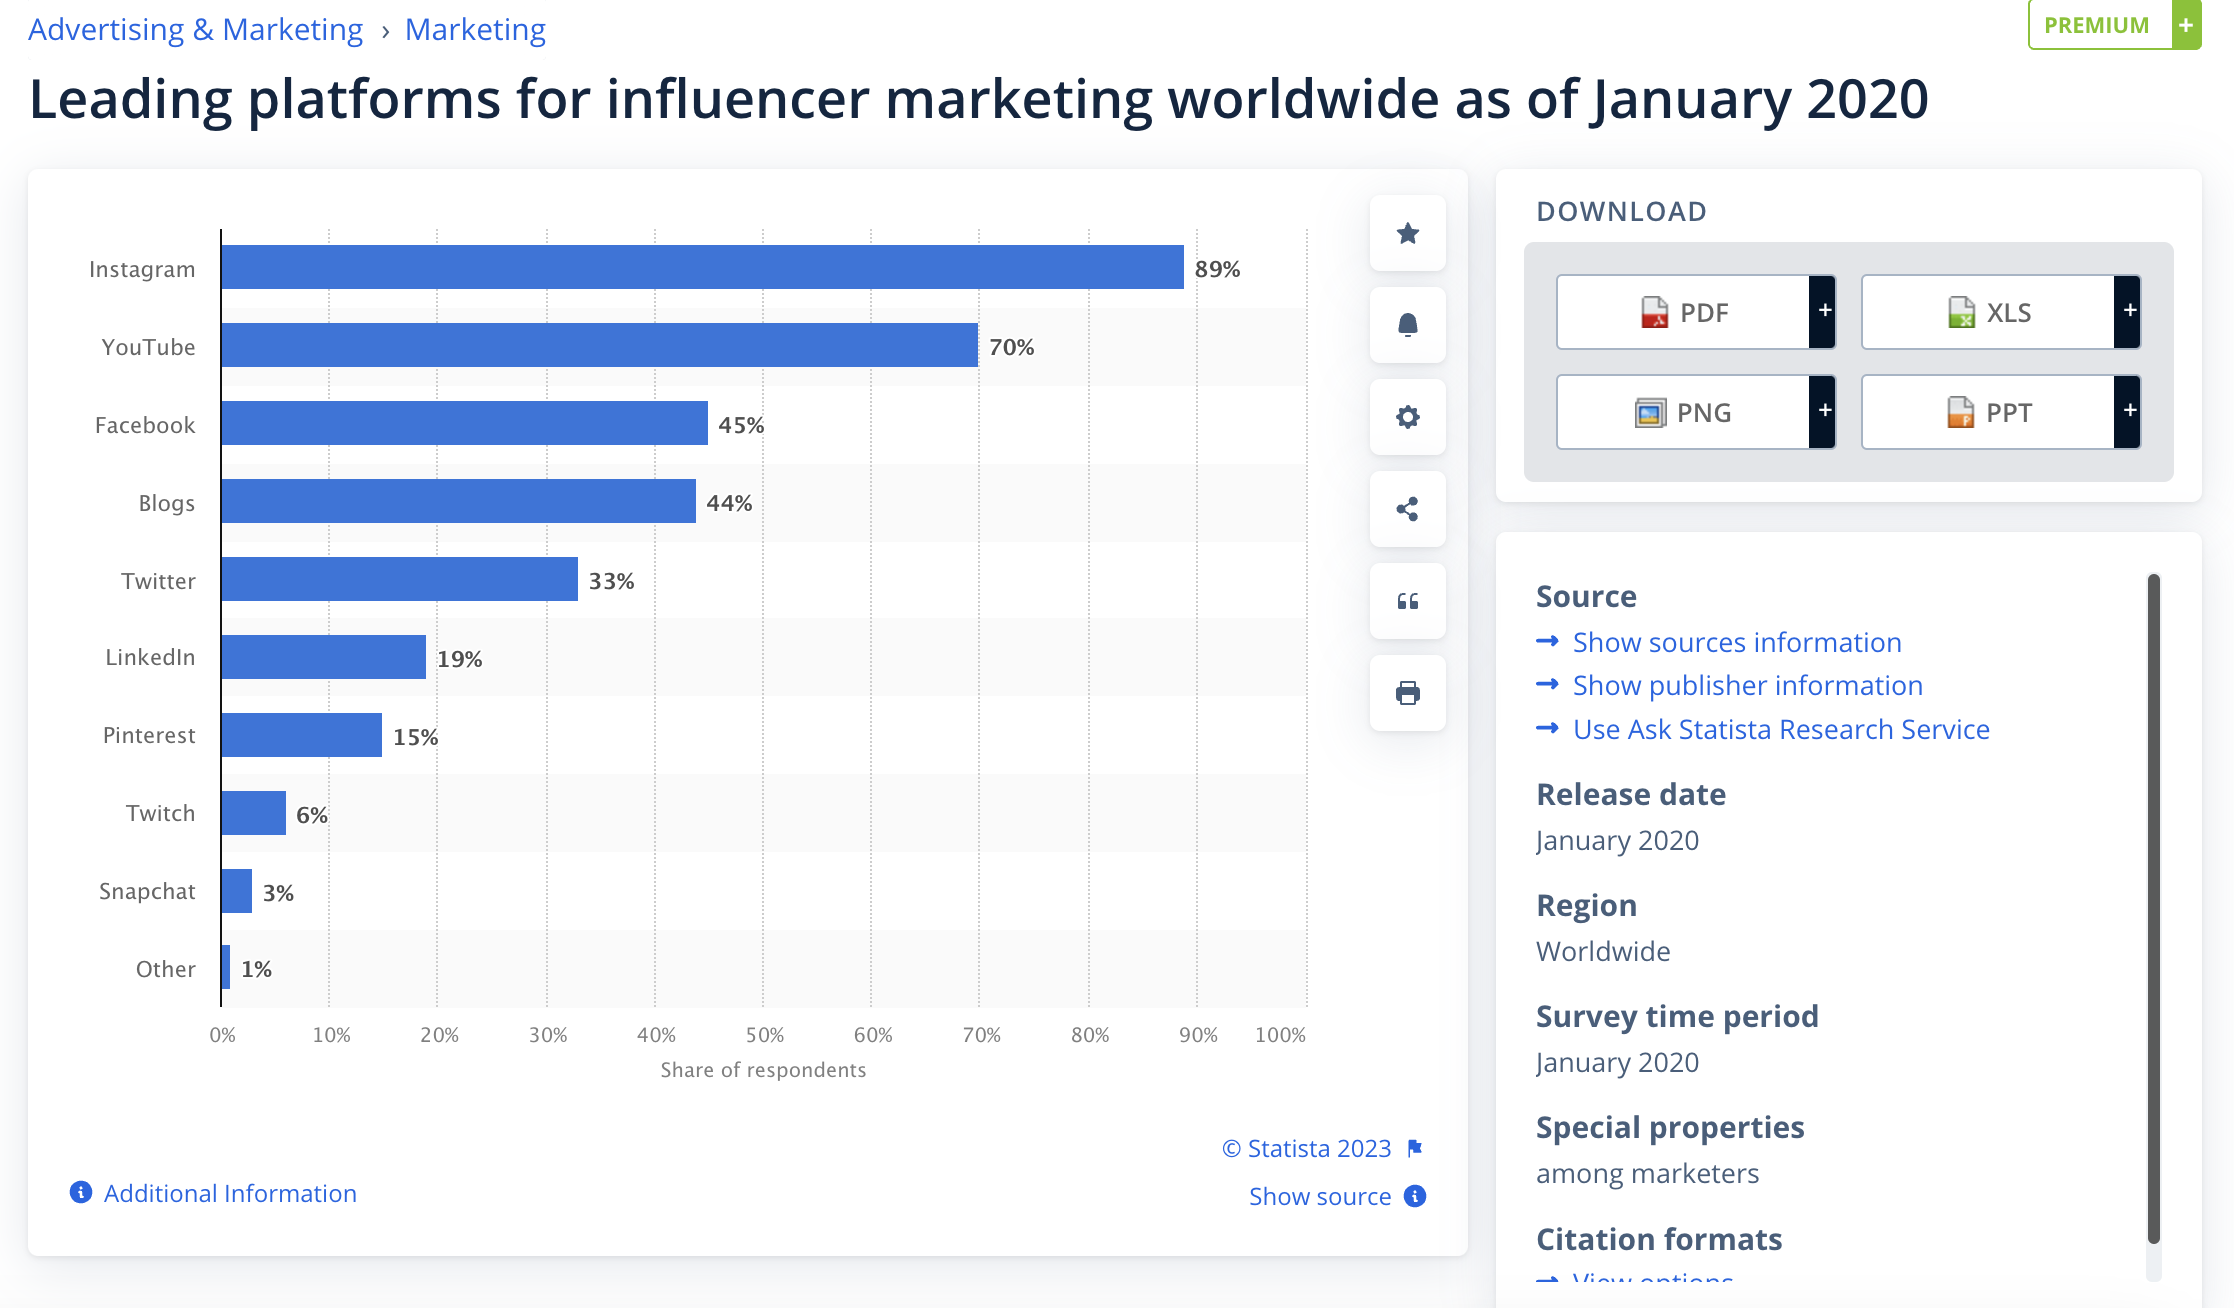 Screenshot from Statista showing leading platforms for influencer marketing worldwide